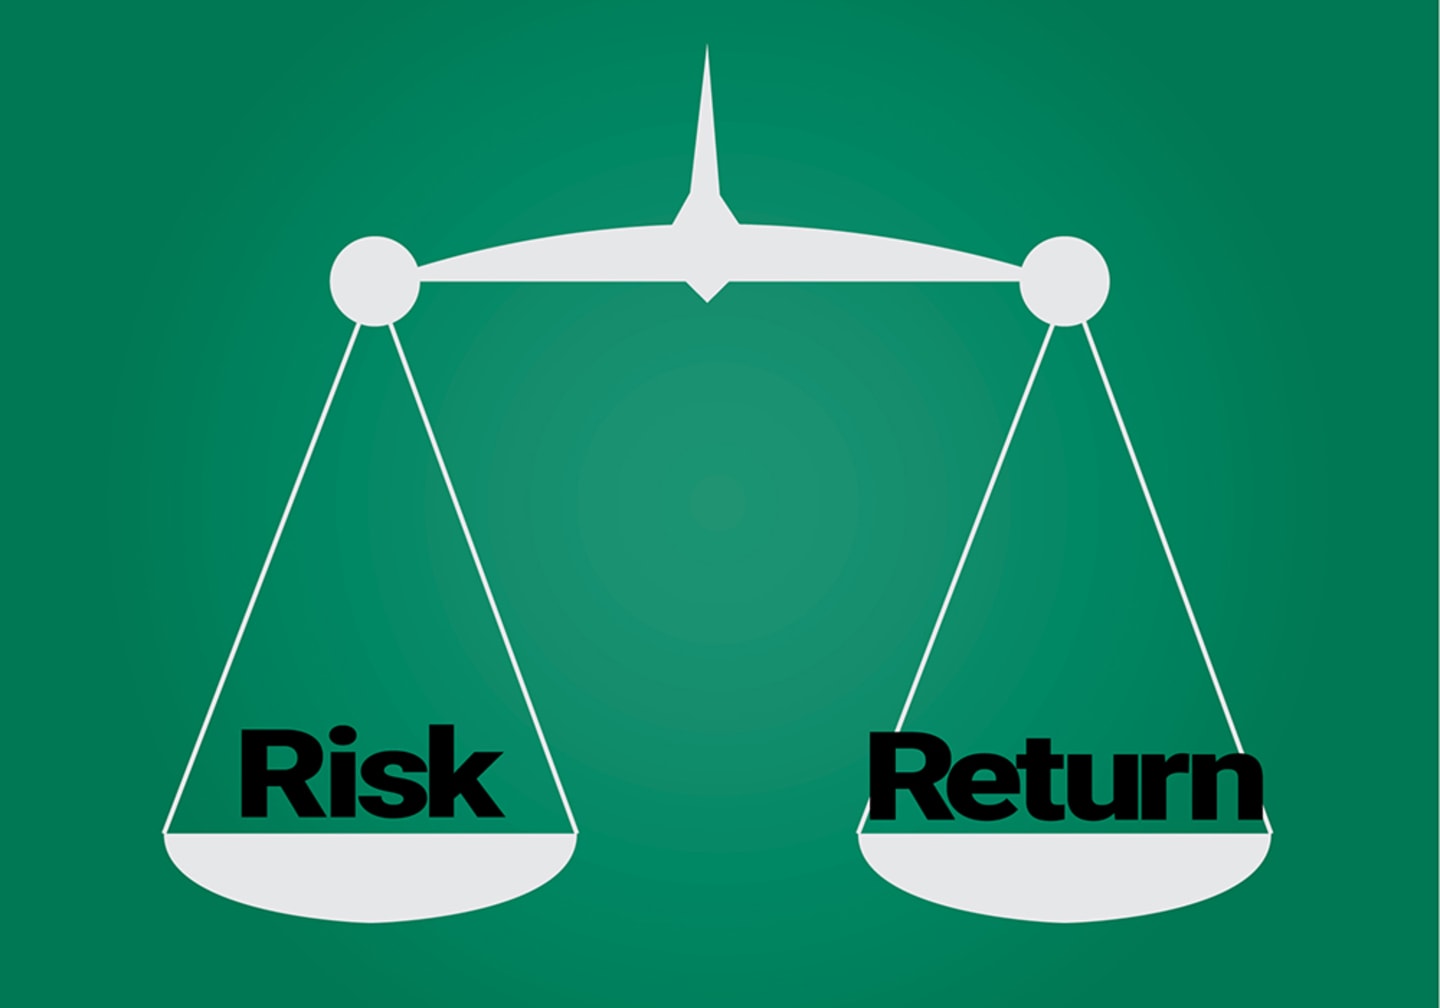 Illustration of scale balancing risk and return.